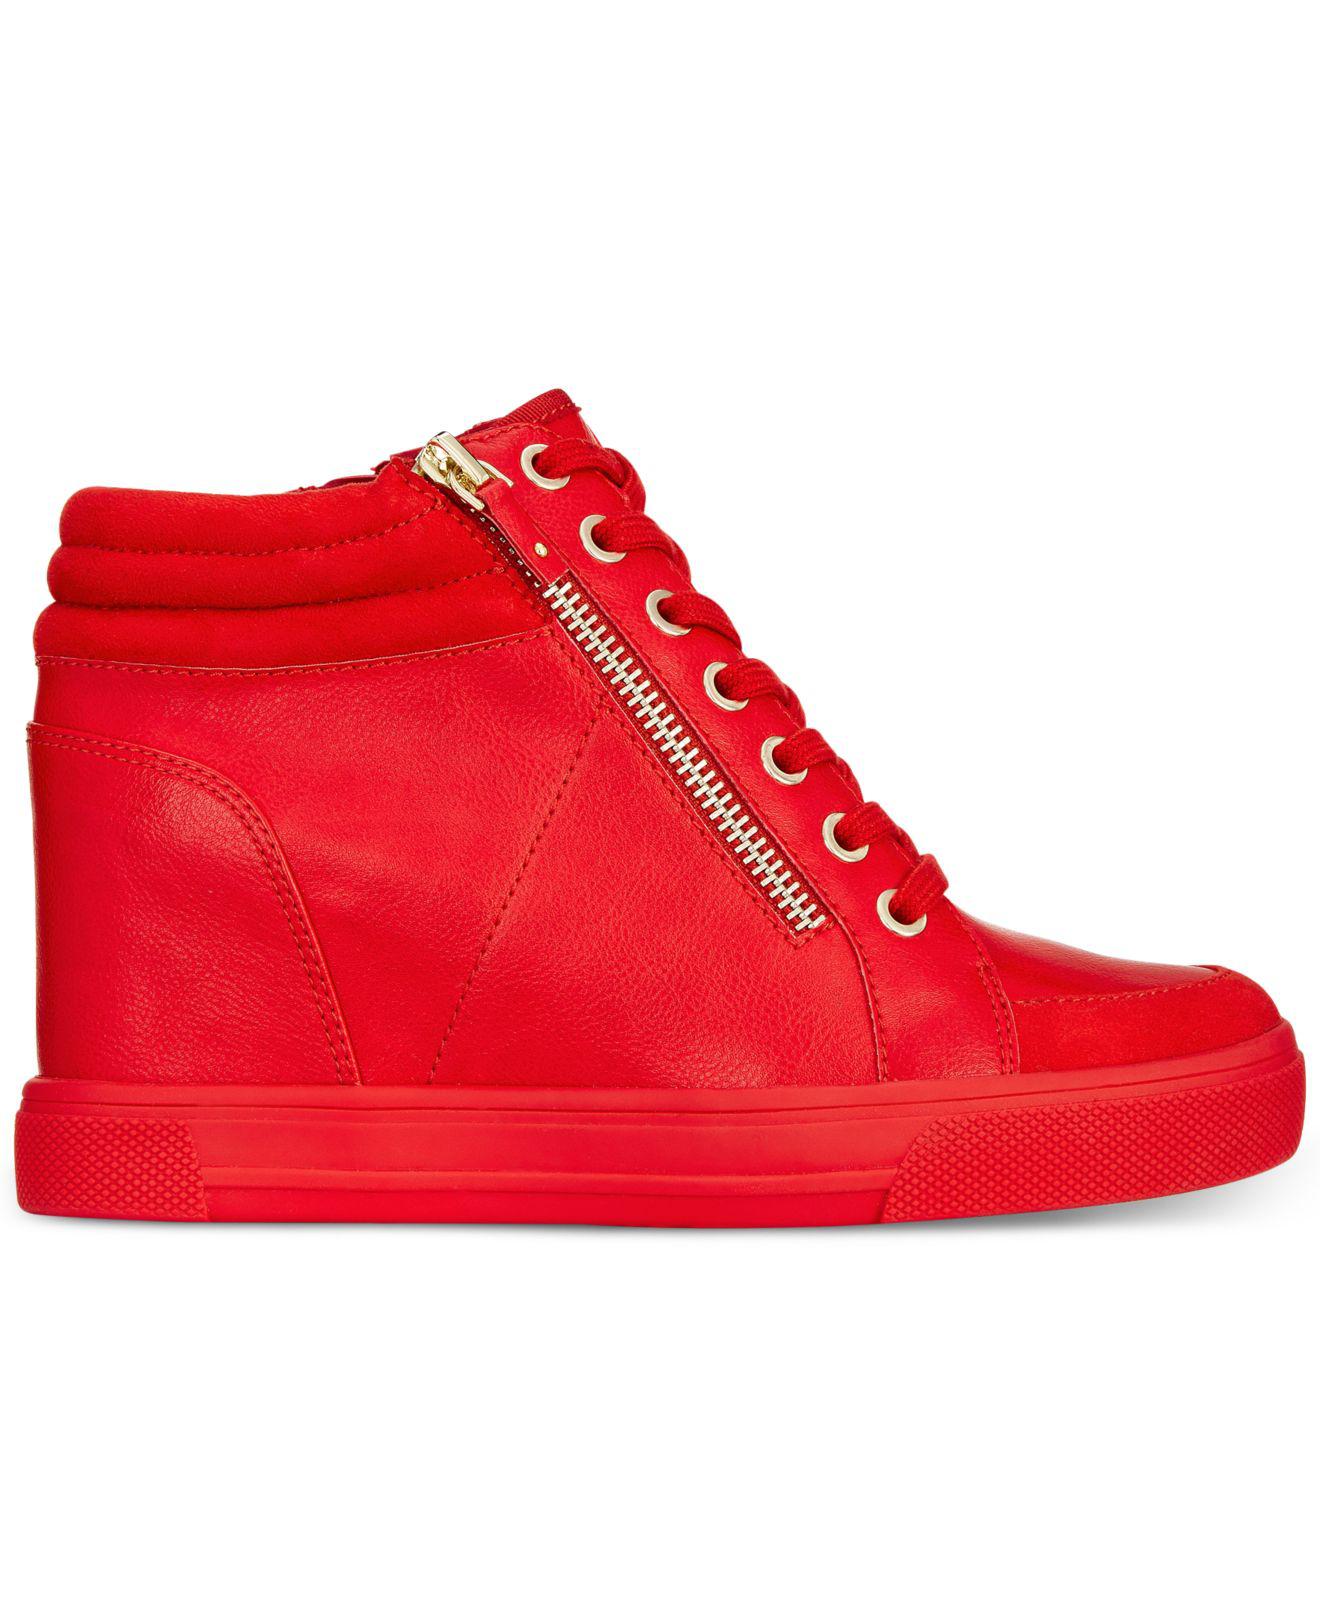 ALDO Kaia Lace-up Wedge Sneakers in Red | Lyst